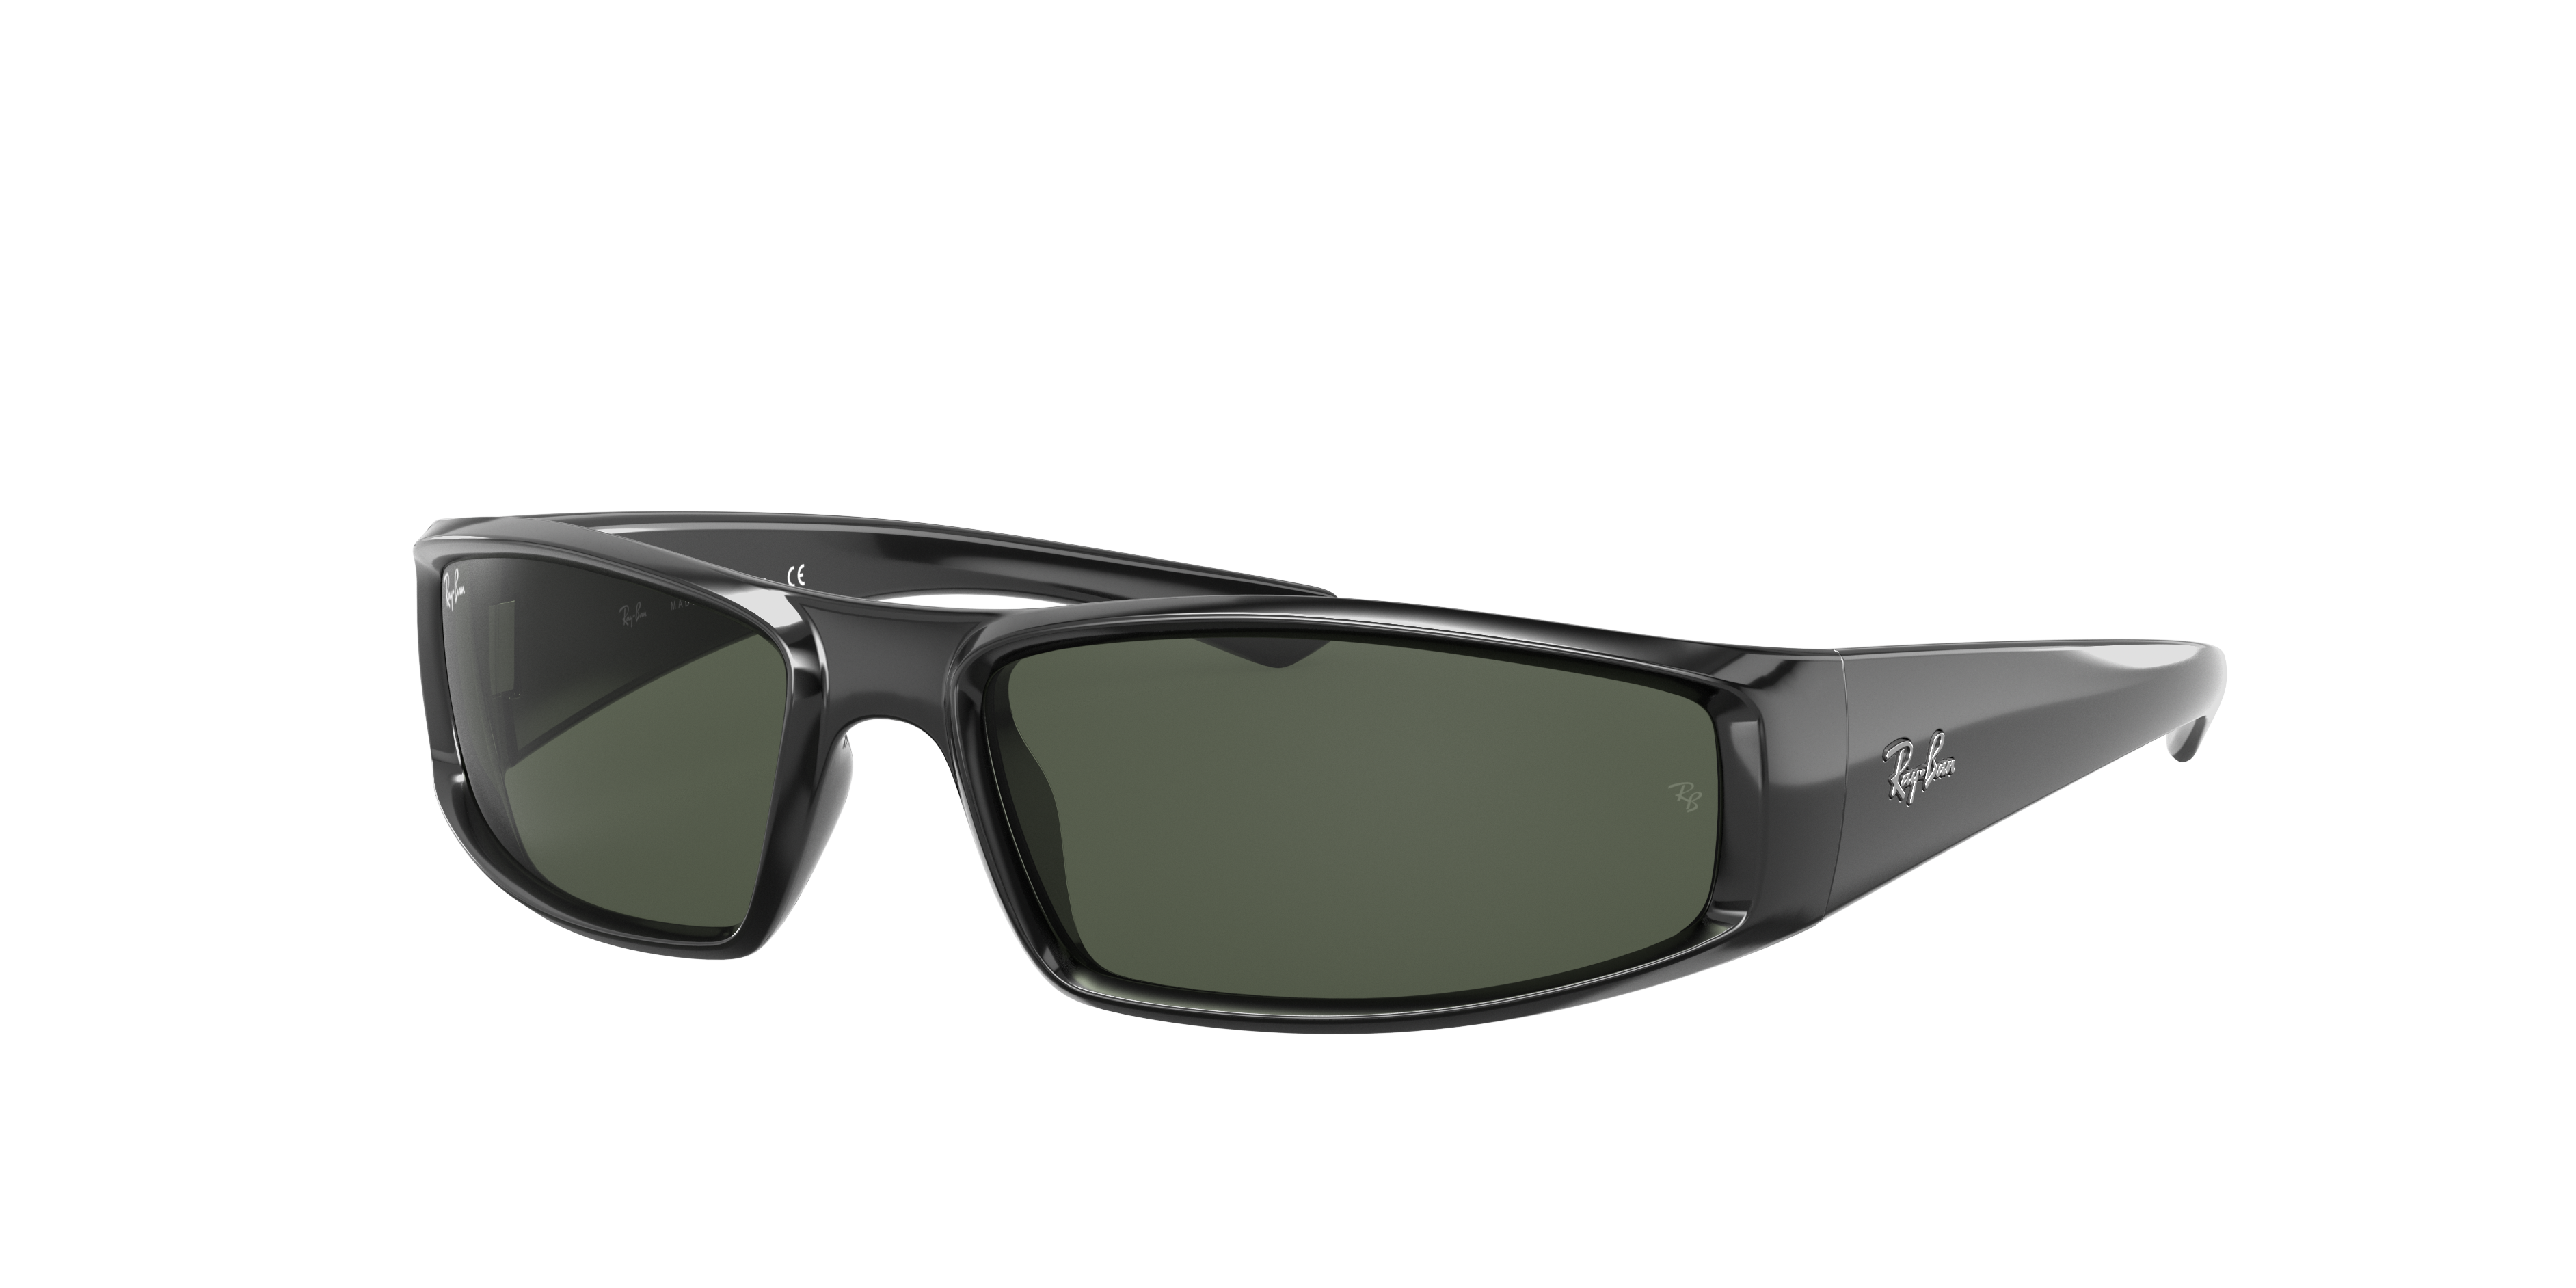 Rb4335 Sunglasses in Black and Green | Ray-Ban®